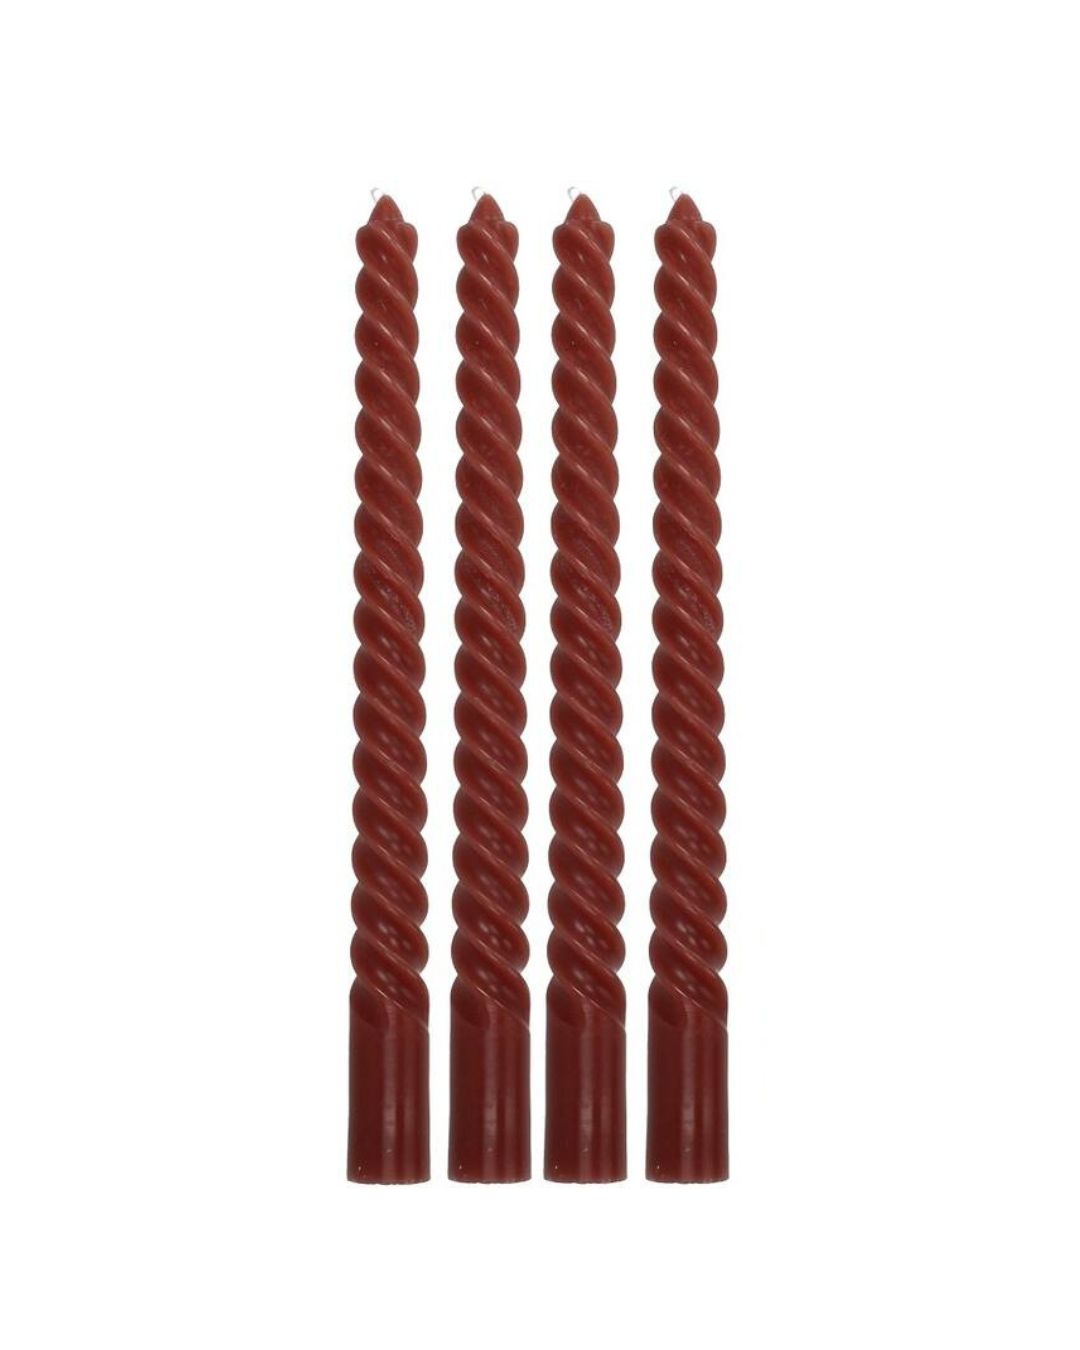 Twisted Candles - Terra (Box of 4)